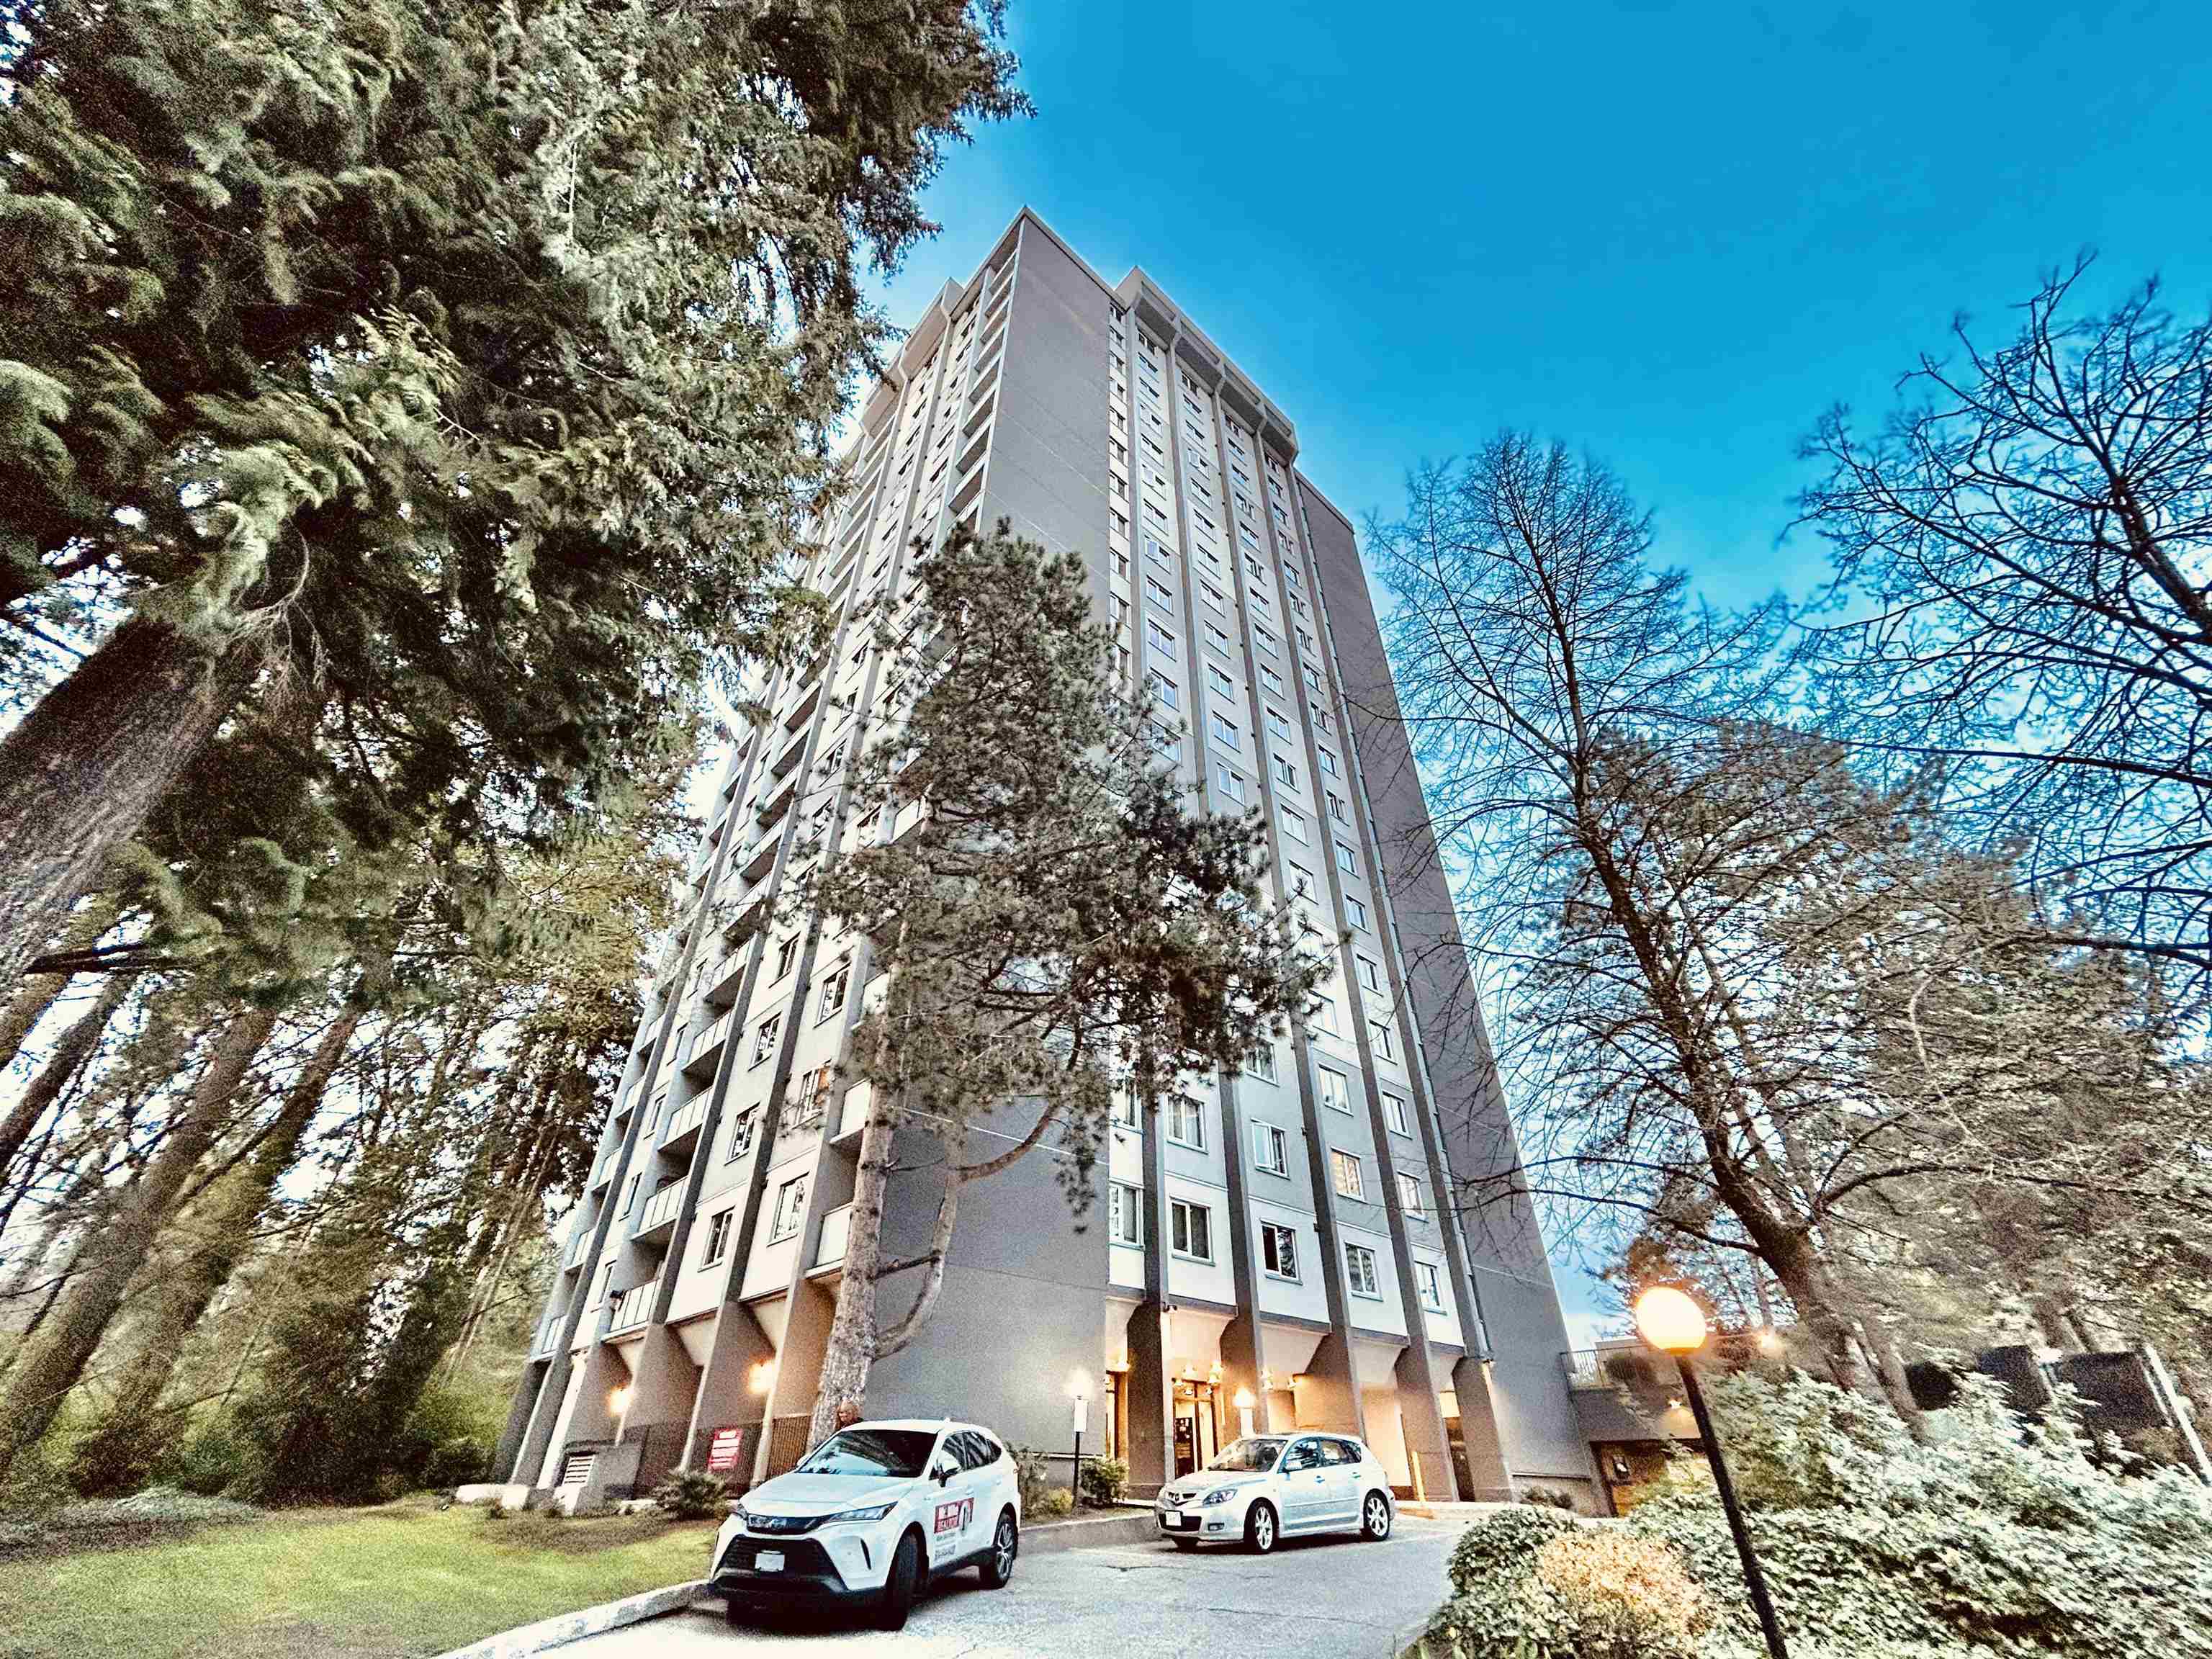 205-9541 ERICKSON DRIVE, Burnaby, British Columbia, 1 Bedroom Bedrooms, ,1 BathroomBathrooms,Residential Attached,For Sale,R2869265